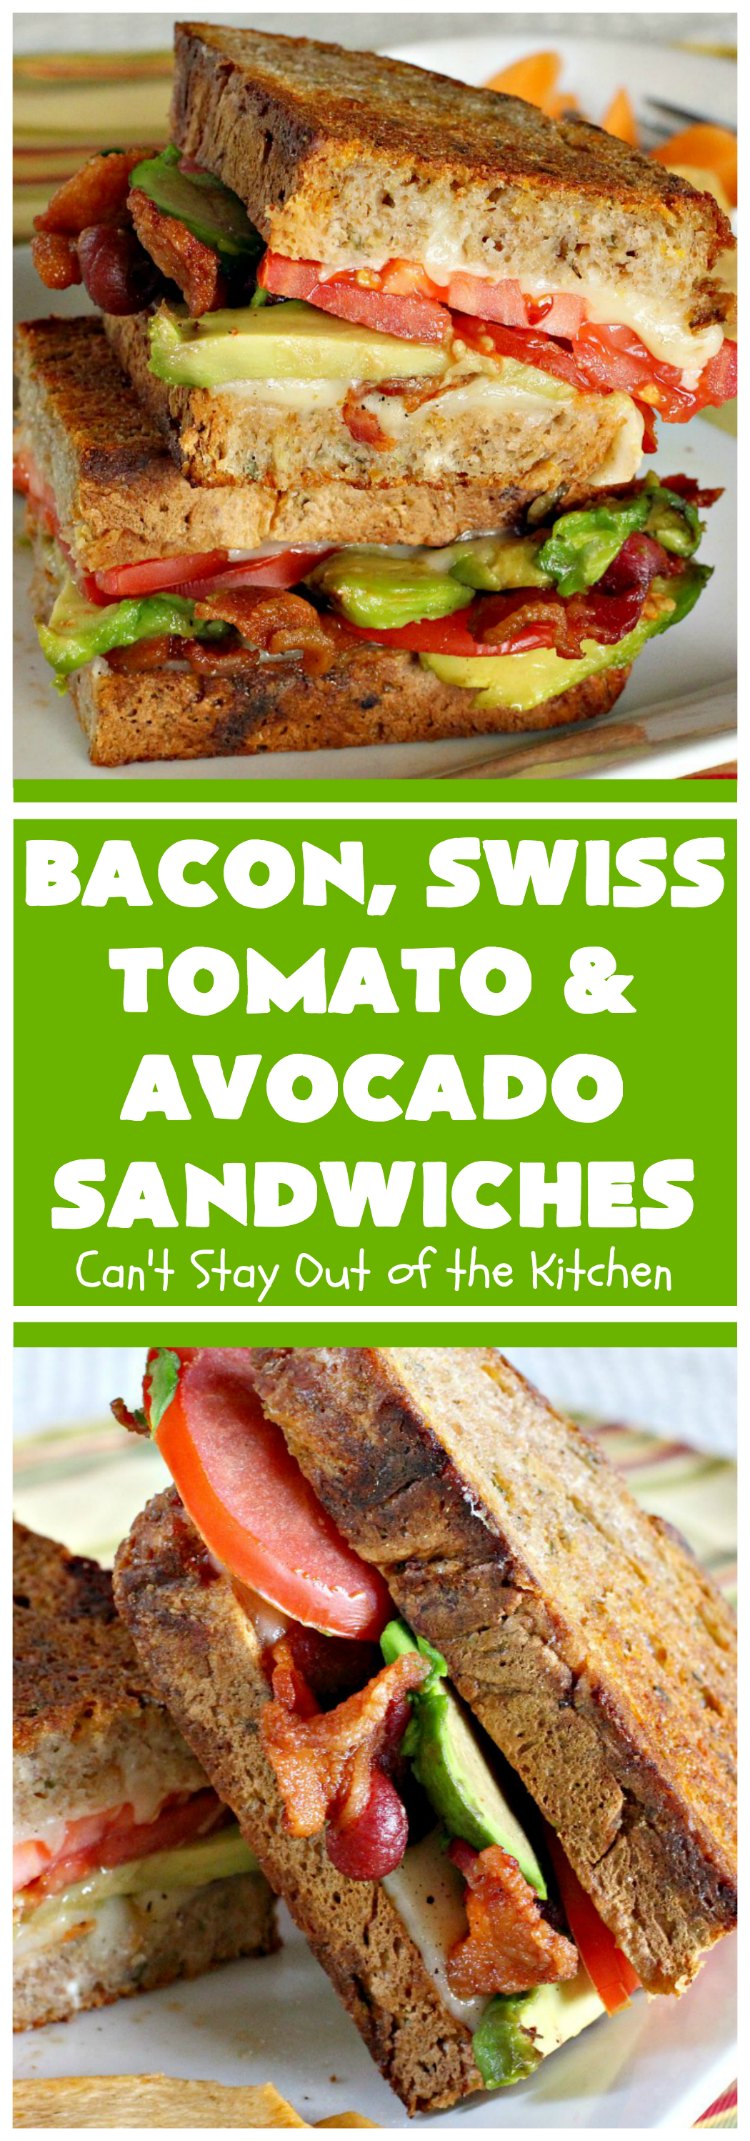 Bacon, Swiss, Tomato and Avocado Sandwiches | Can't Stay Out of the Kitchen | these monster-sized #sandwiches are hearty, filling & such satisfying comfort food. They're filled with #Bacon, #SwissCheese, #Avocados & #Tomatoes & grilled up to perfection. Great for #tailgating parties or weekend meals when you're short on time. #BaconSwissTomatoAndAvocadoSandwiches 